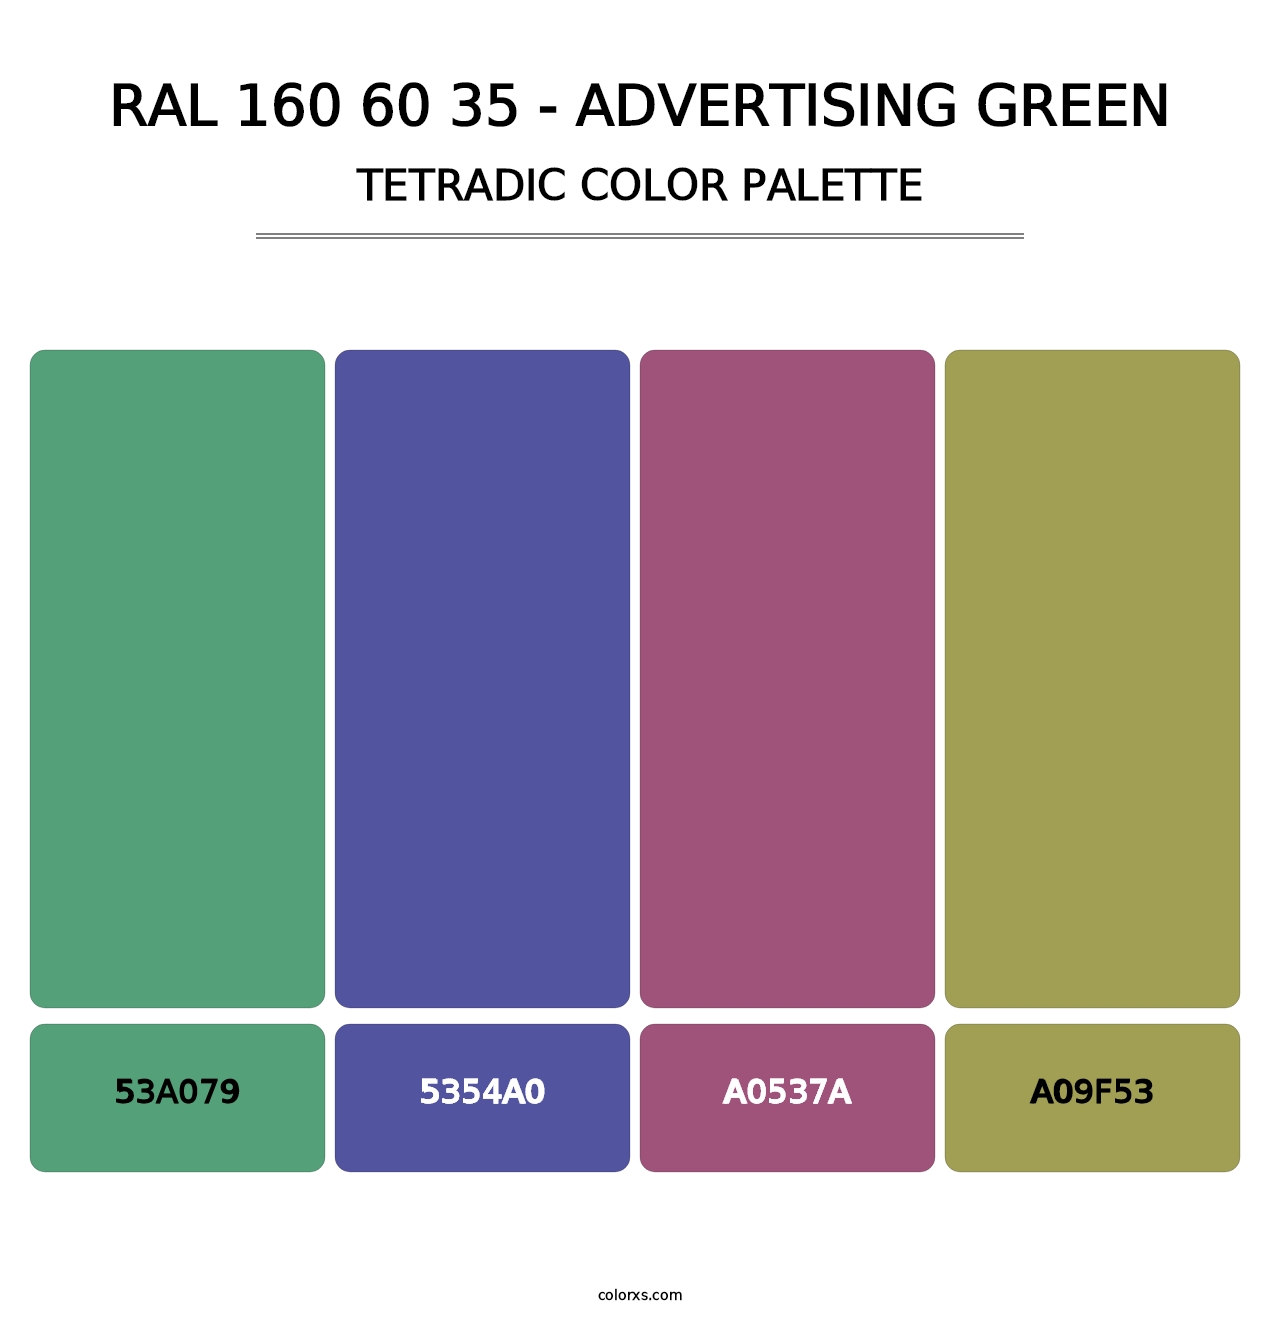 RAL 160 60 35 - Advertising Green - Tetradic Color Palette